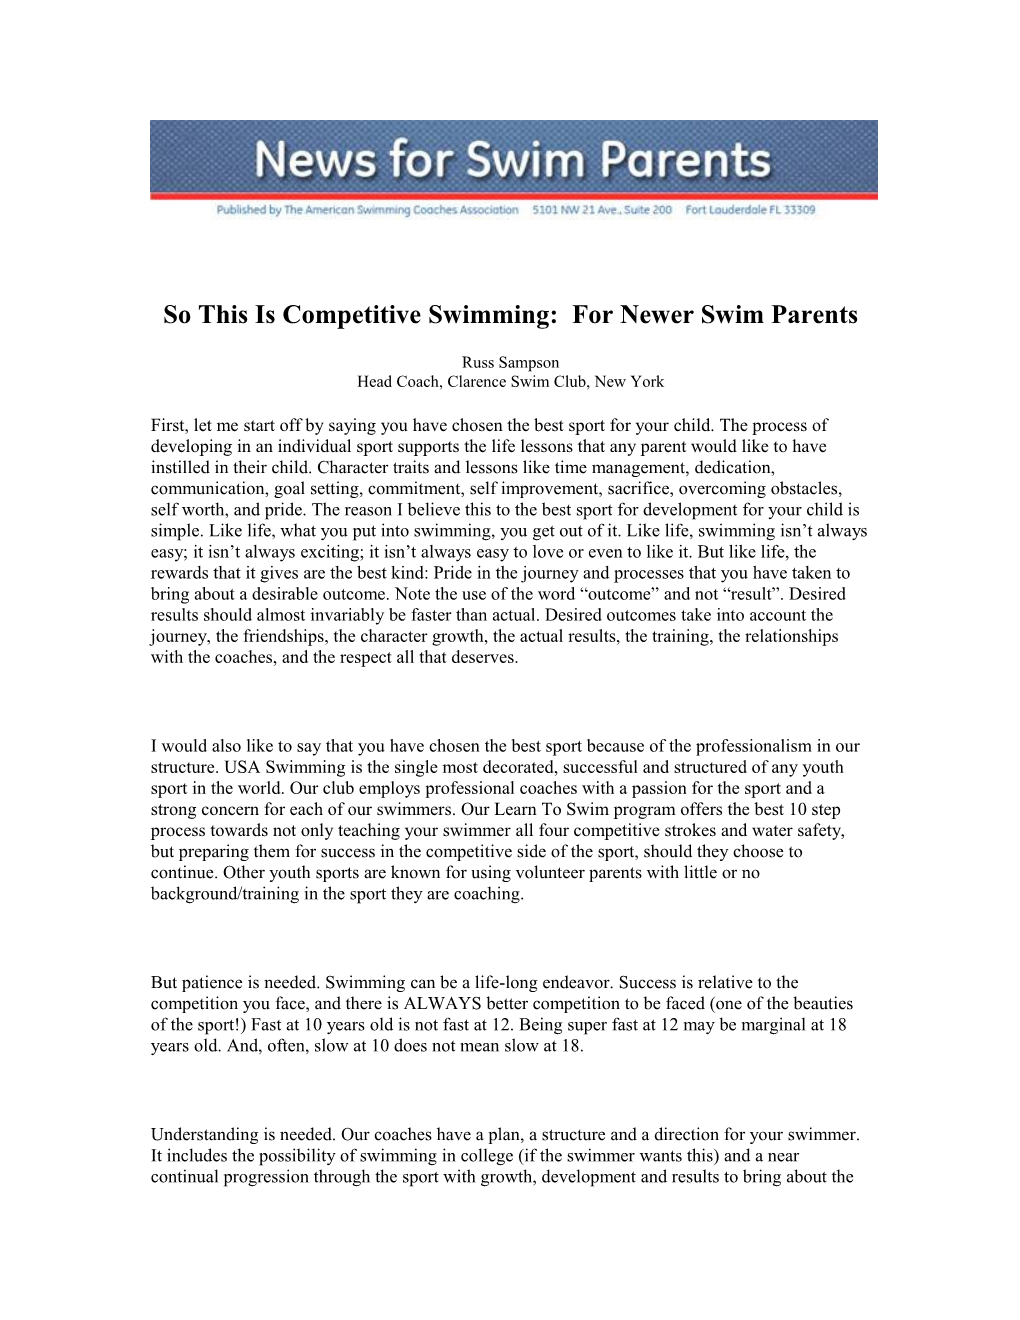 So This Is Competitive Swimming: for Newer Swim Parents